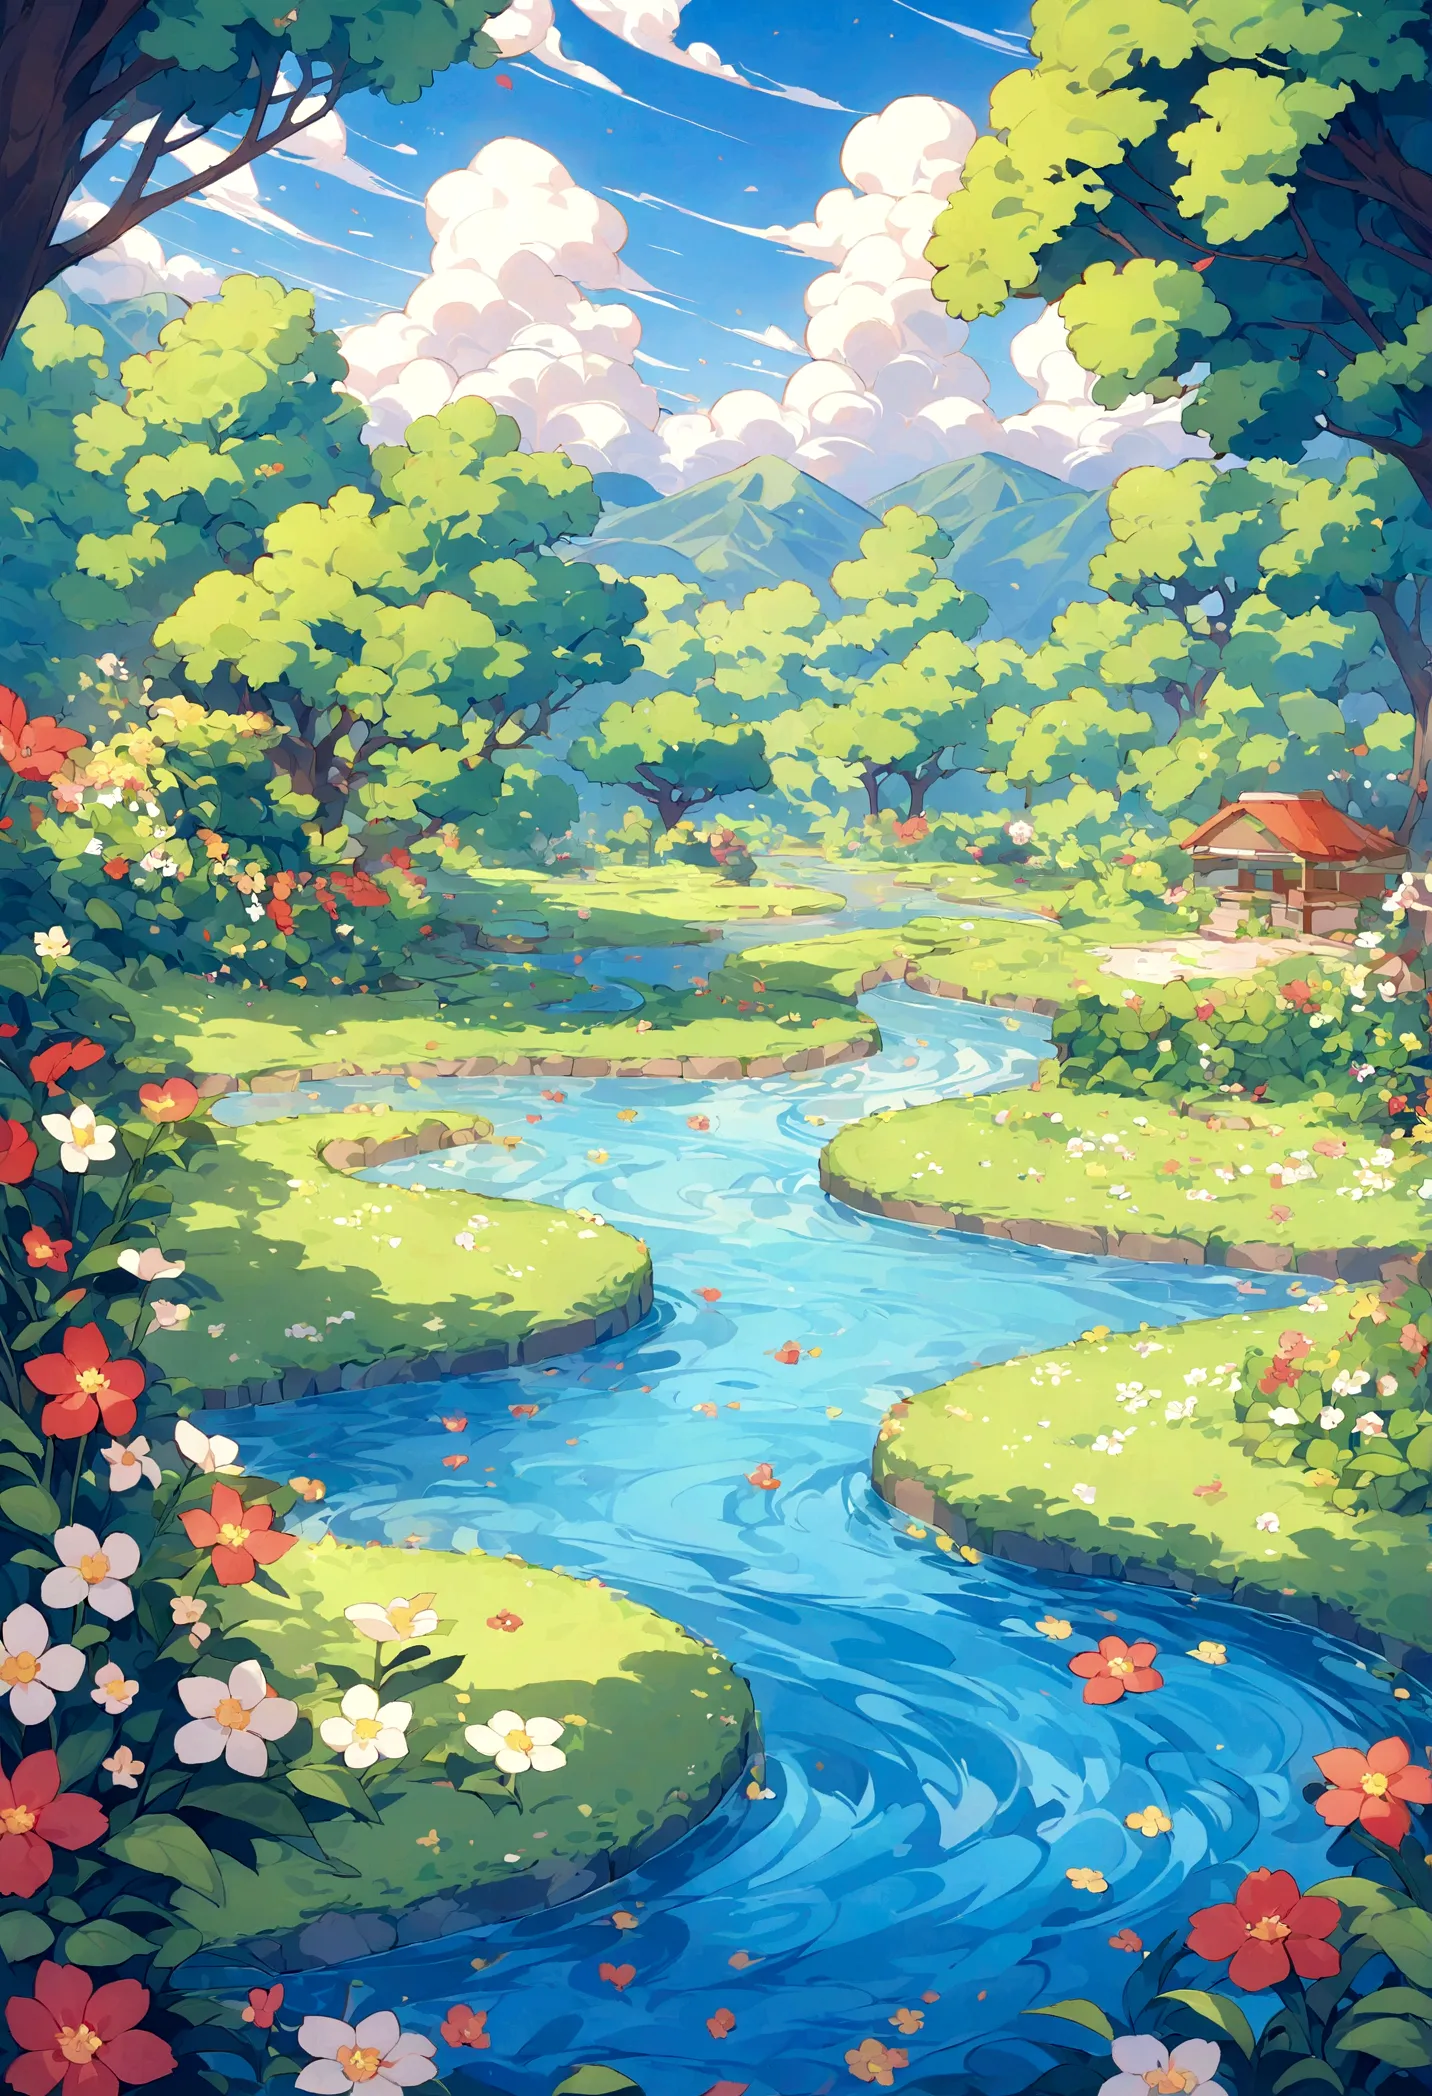 Pixelart generates a beautiful and tranquil image of a garden, There are colorful flowers, gentle stream, And the sounds of natu...